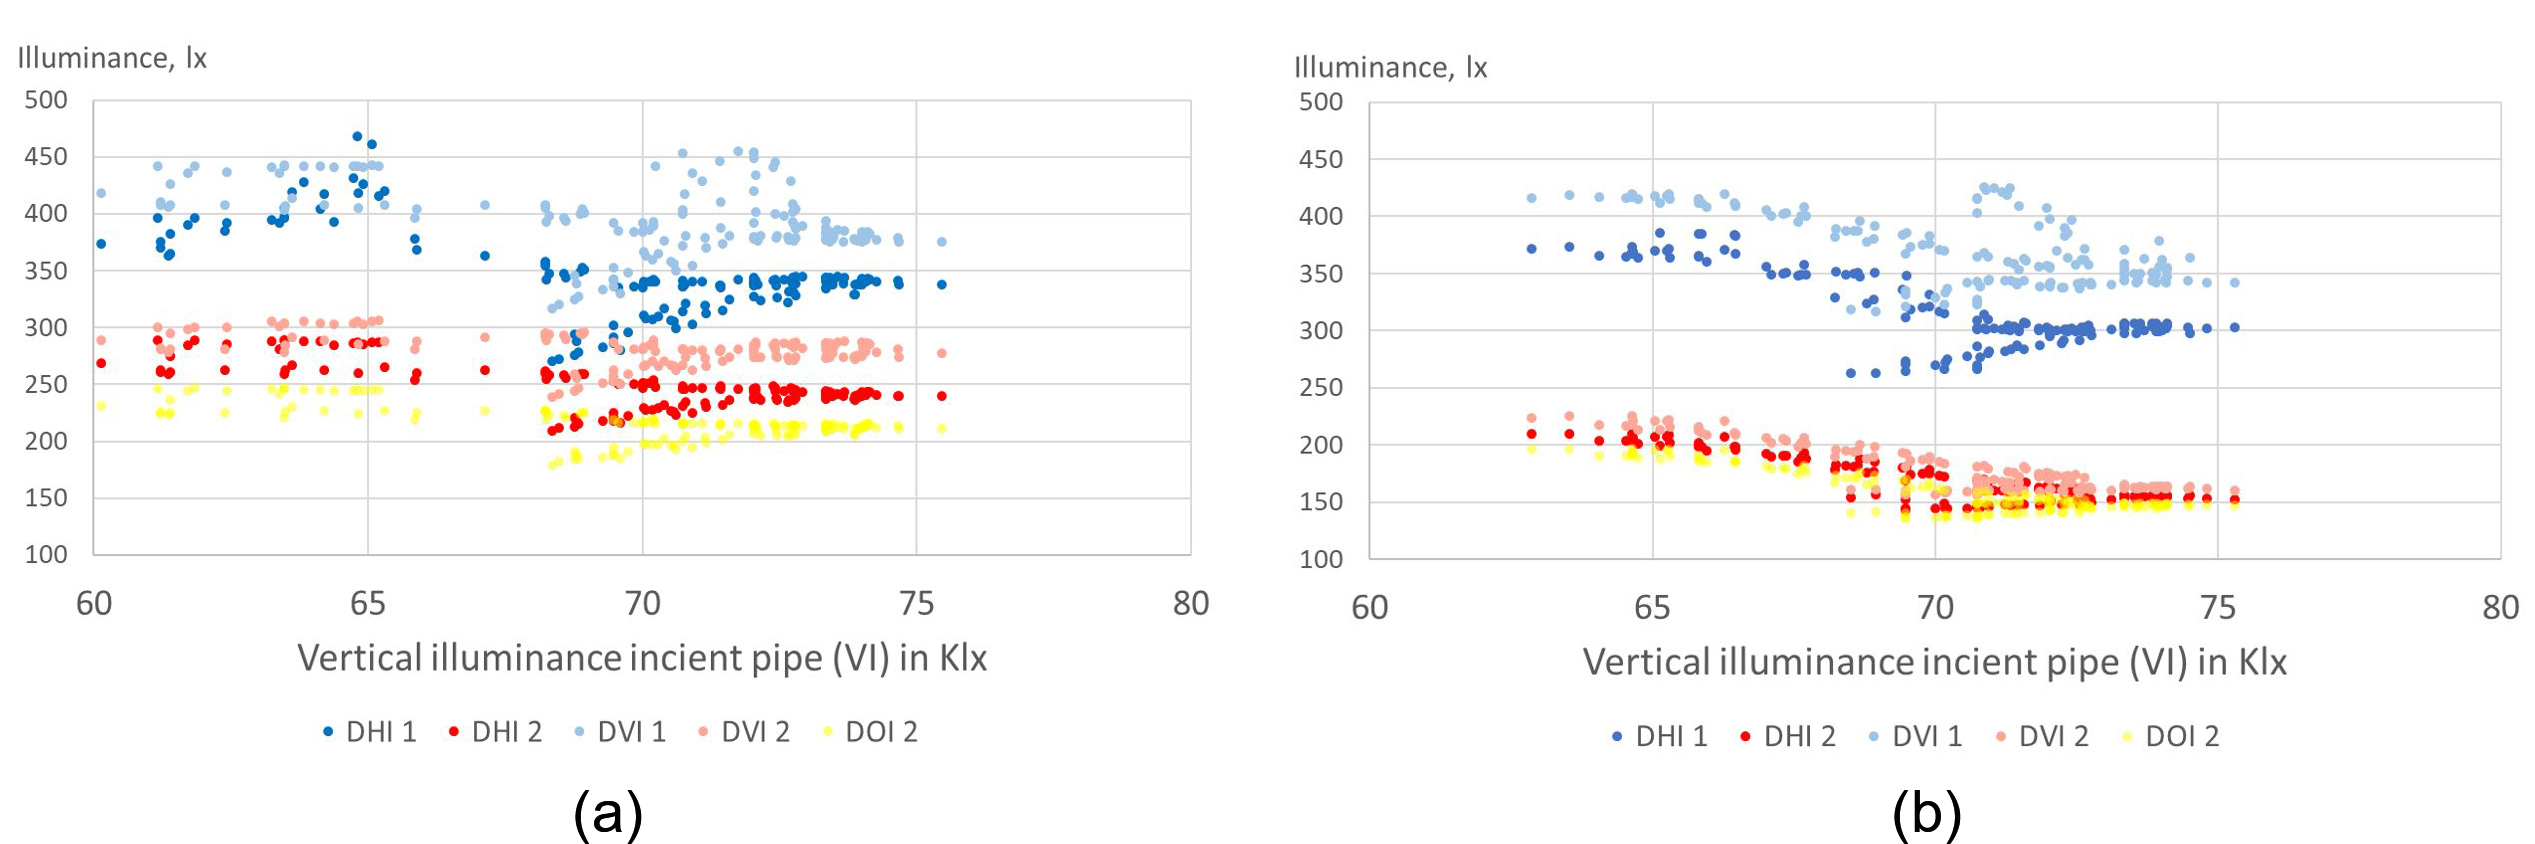 Illuminance values for the test (a) and reference (b) pair days which were recorded between 12:00am and 14:30pm. The scatters show the illuminance values recorded for all five illuminance meters referred to the vertical illuminance (VI); Bluish lines present illuminance recorded for the desk 1 and red, orange and yellow lines present illuminance values recorded for the desk 2.